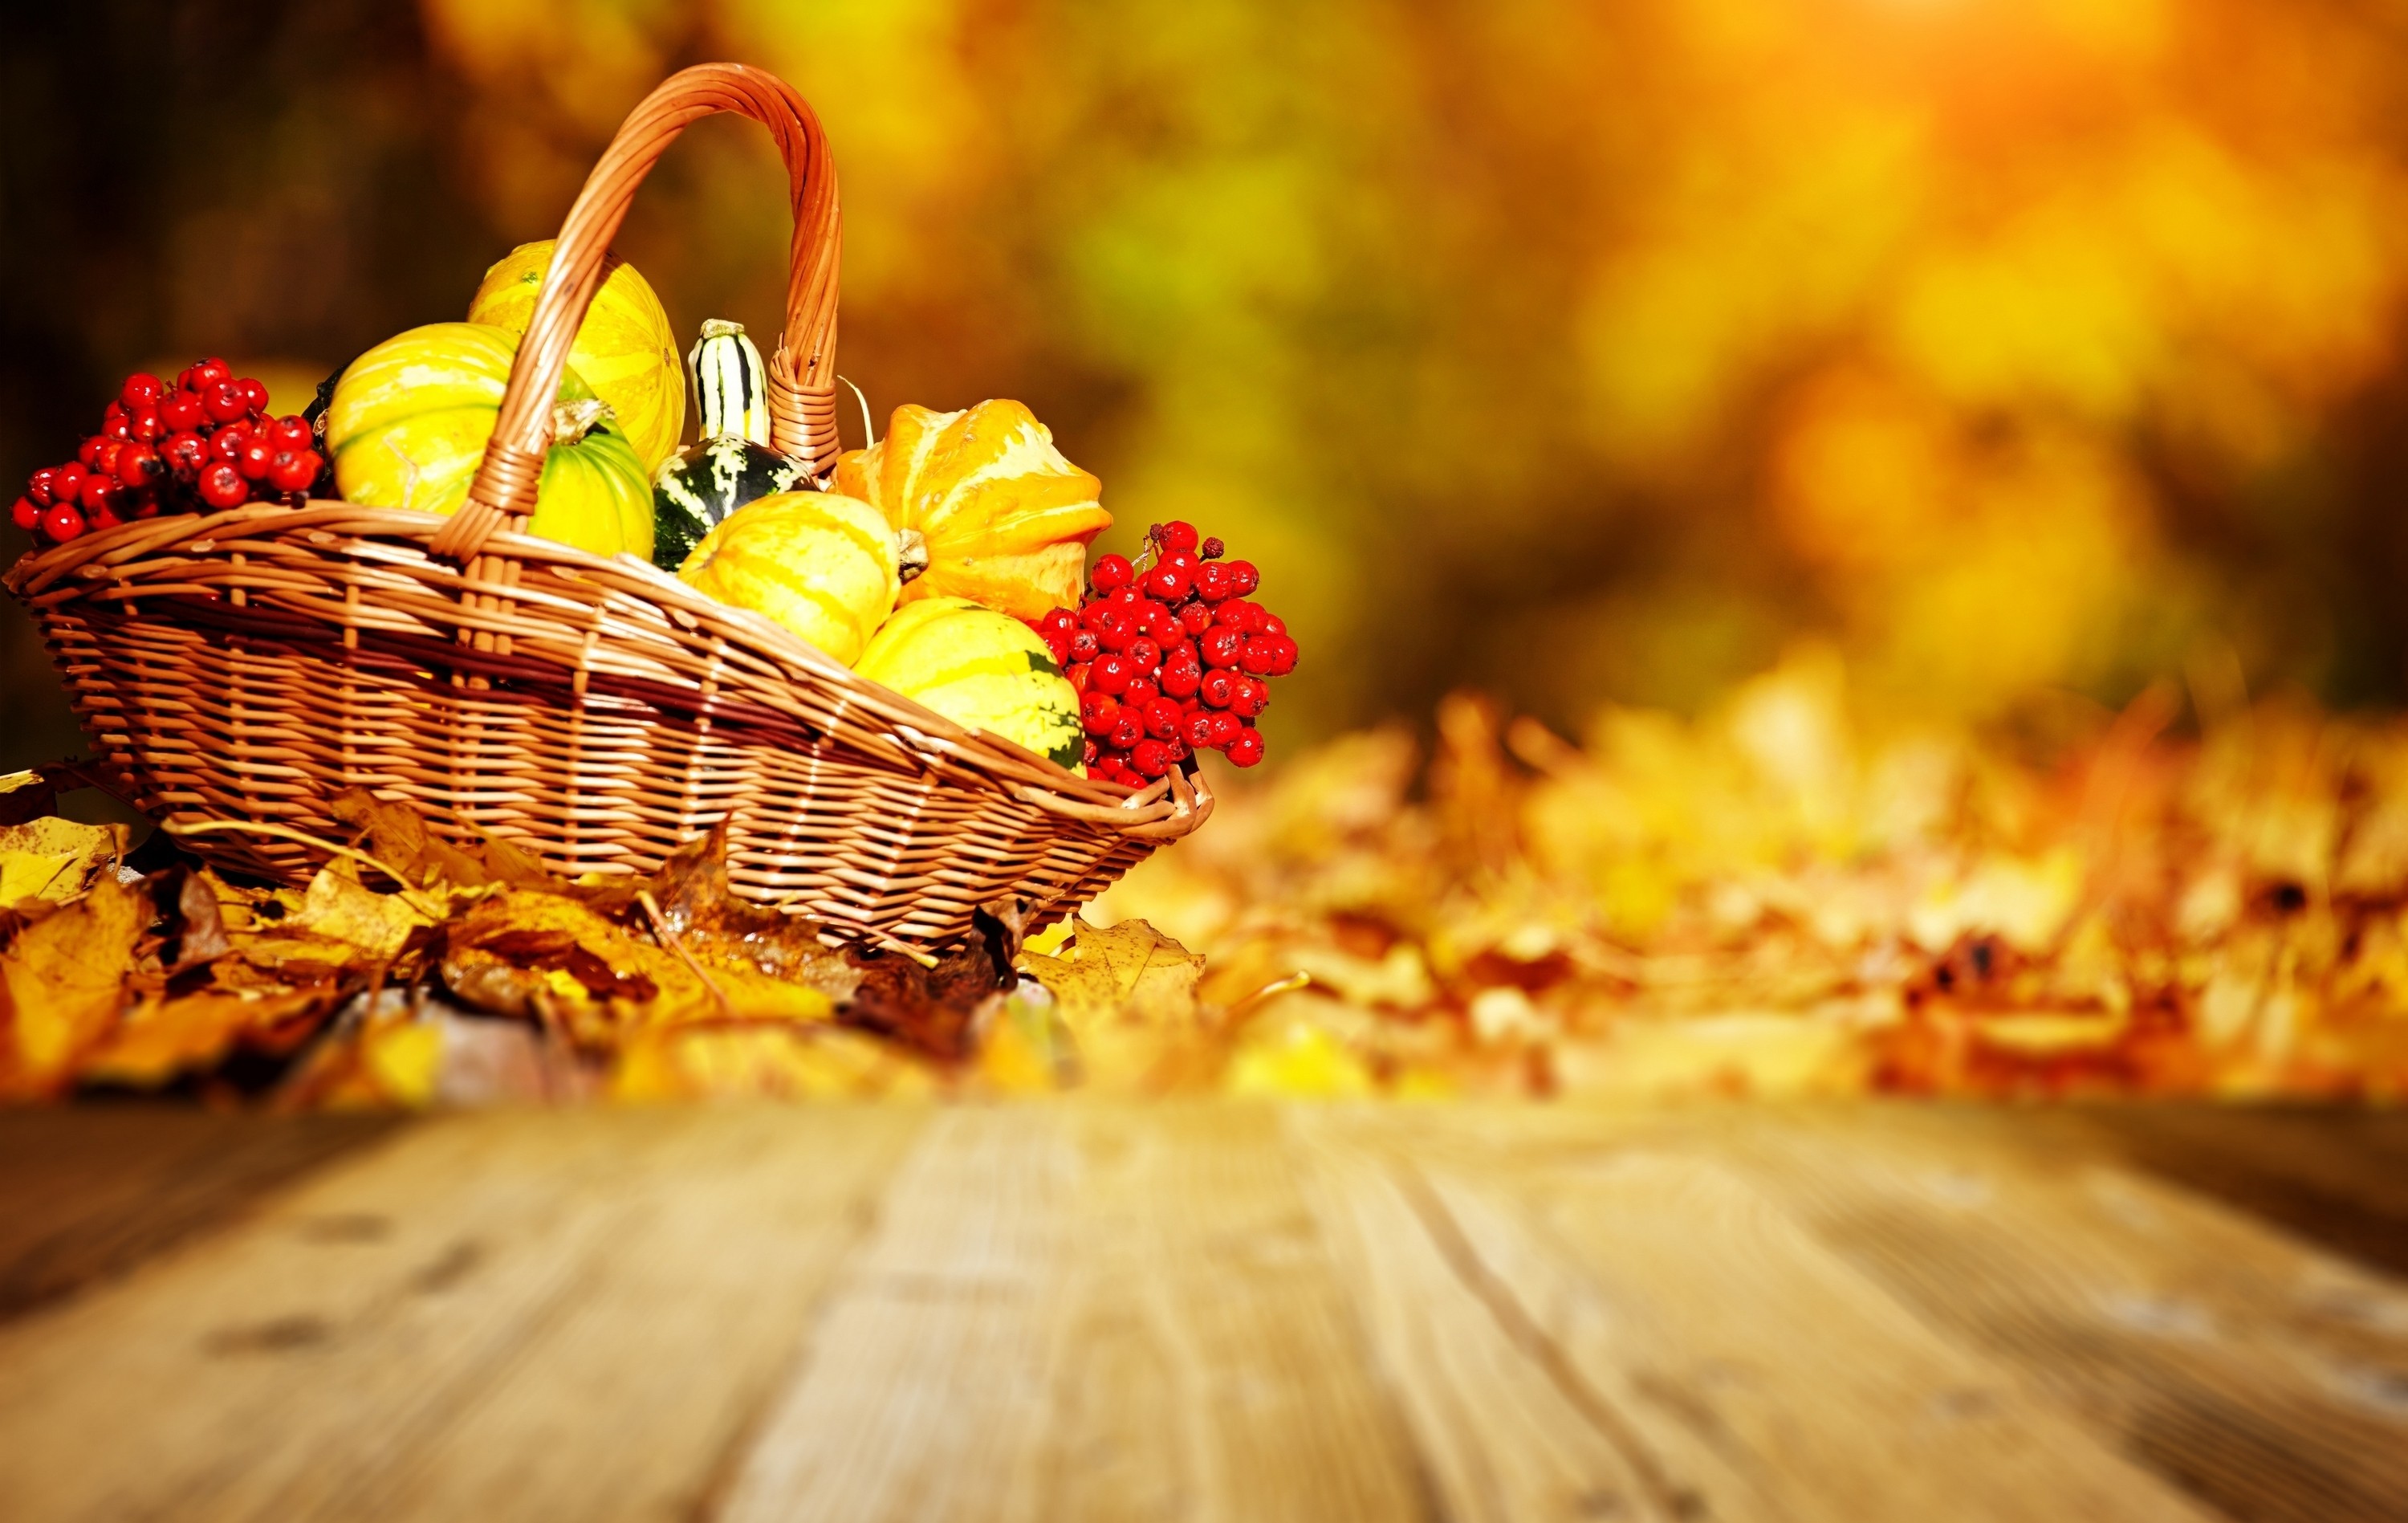 Fall Harvest wallpaper ·① Download free amazing HD backgrounds for ...